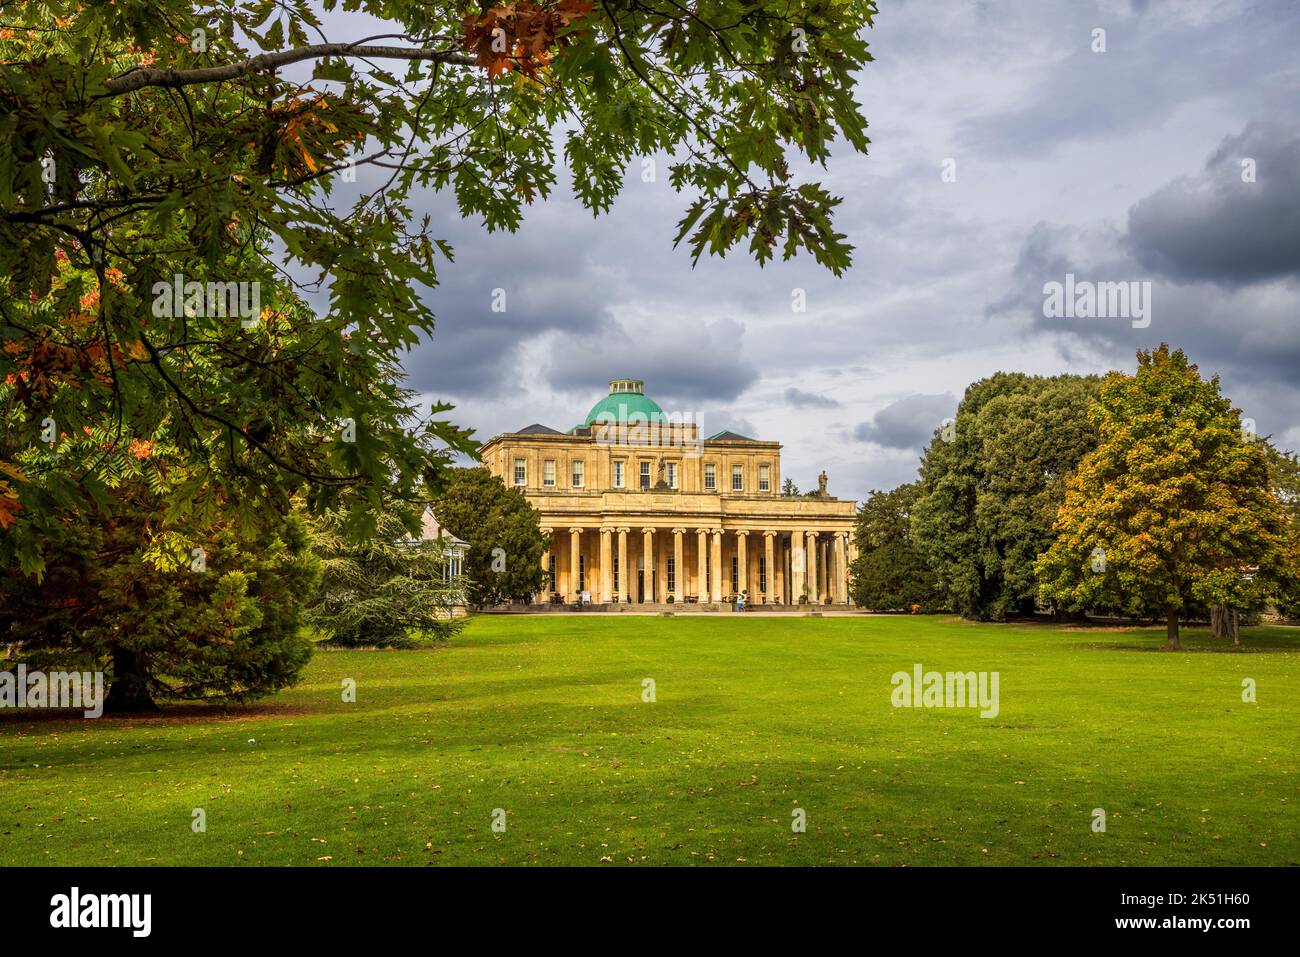 The Pittville Pump Room in the autumn, Cheltenham Spa, Gloucestershire, England Stock Photo